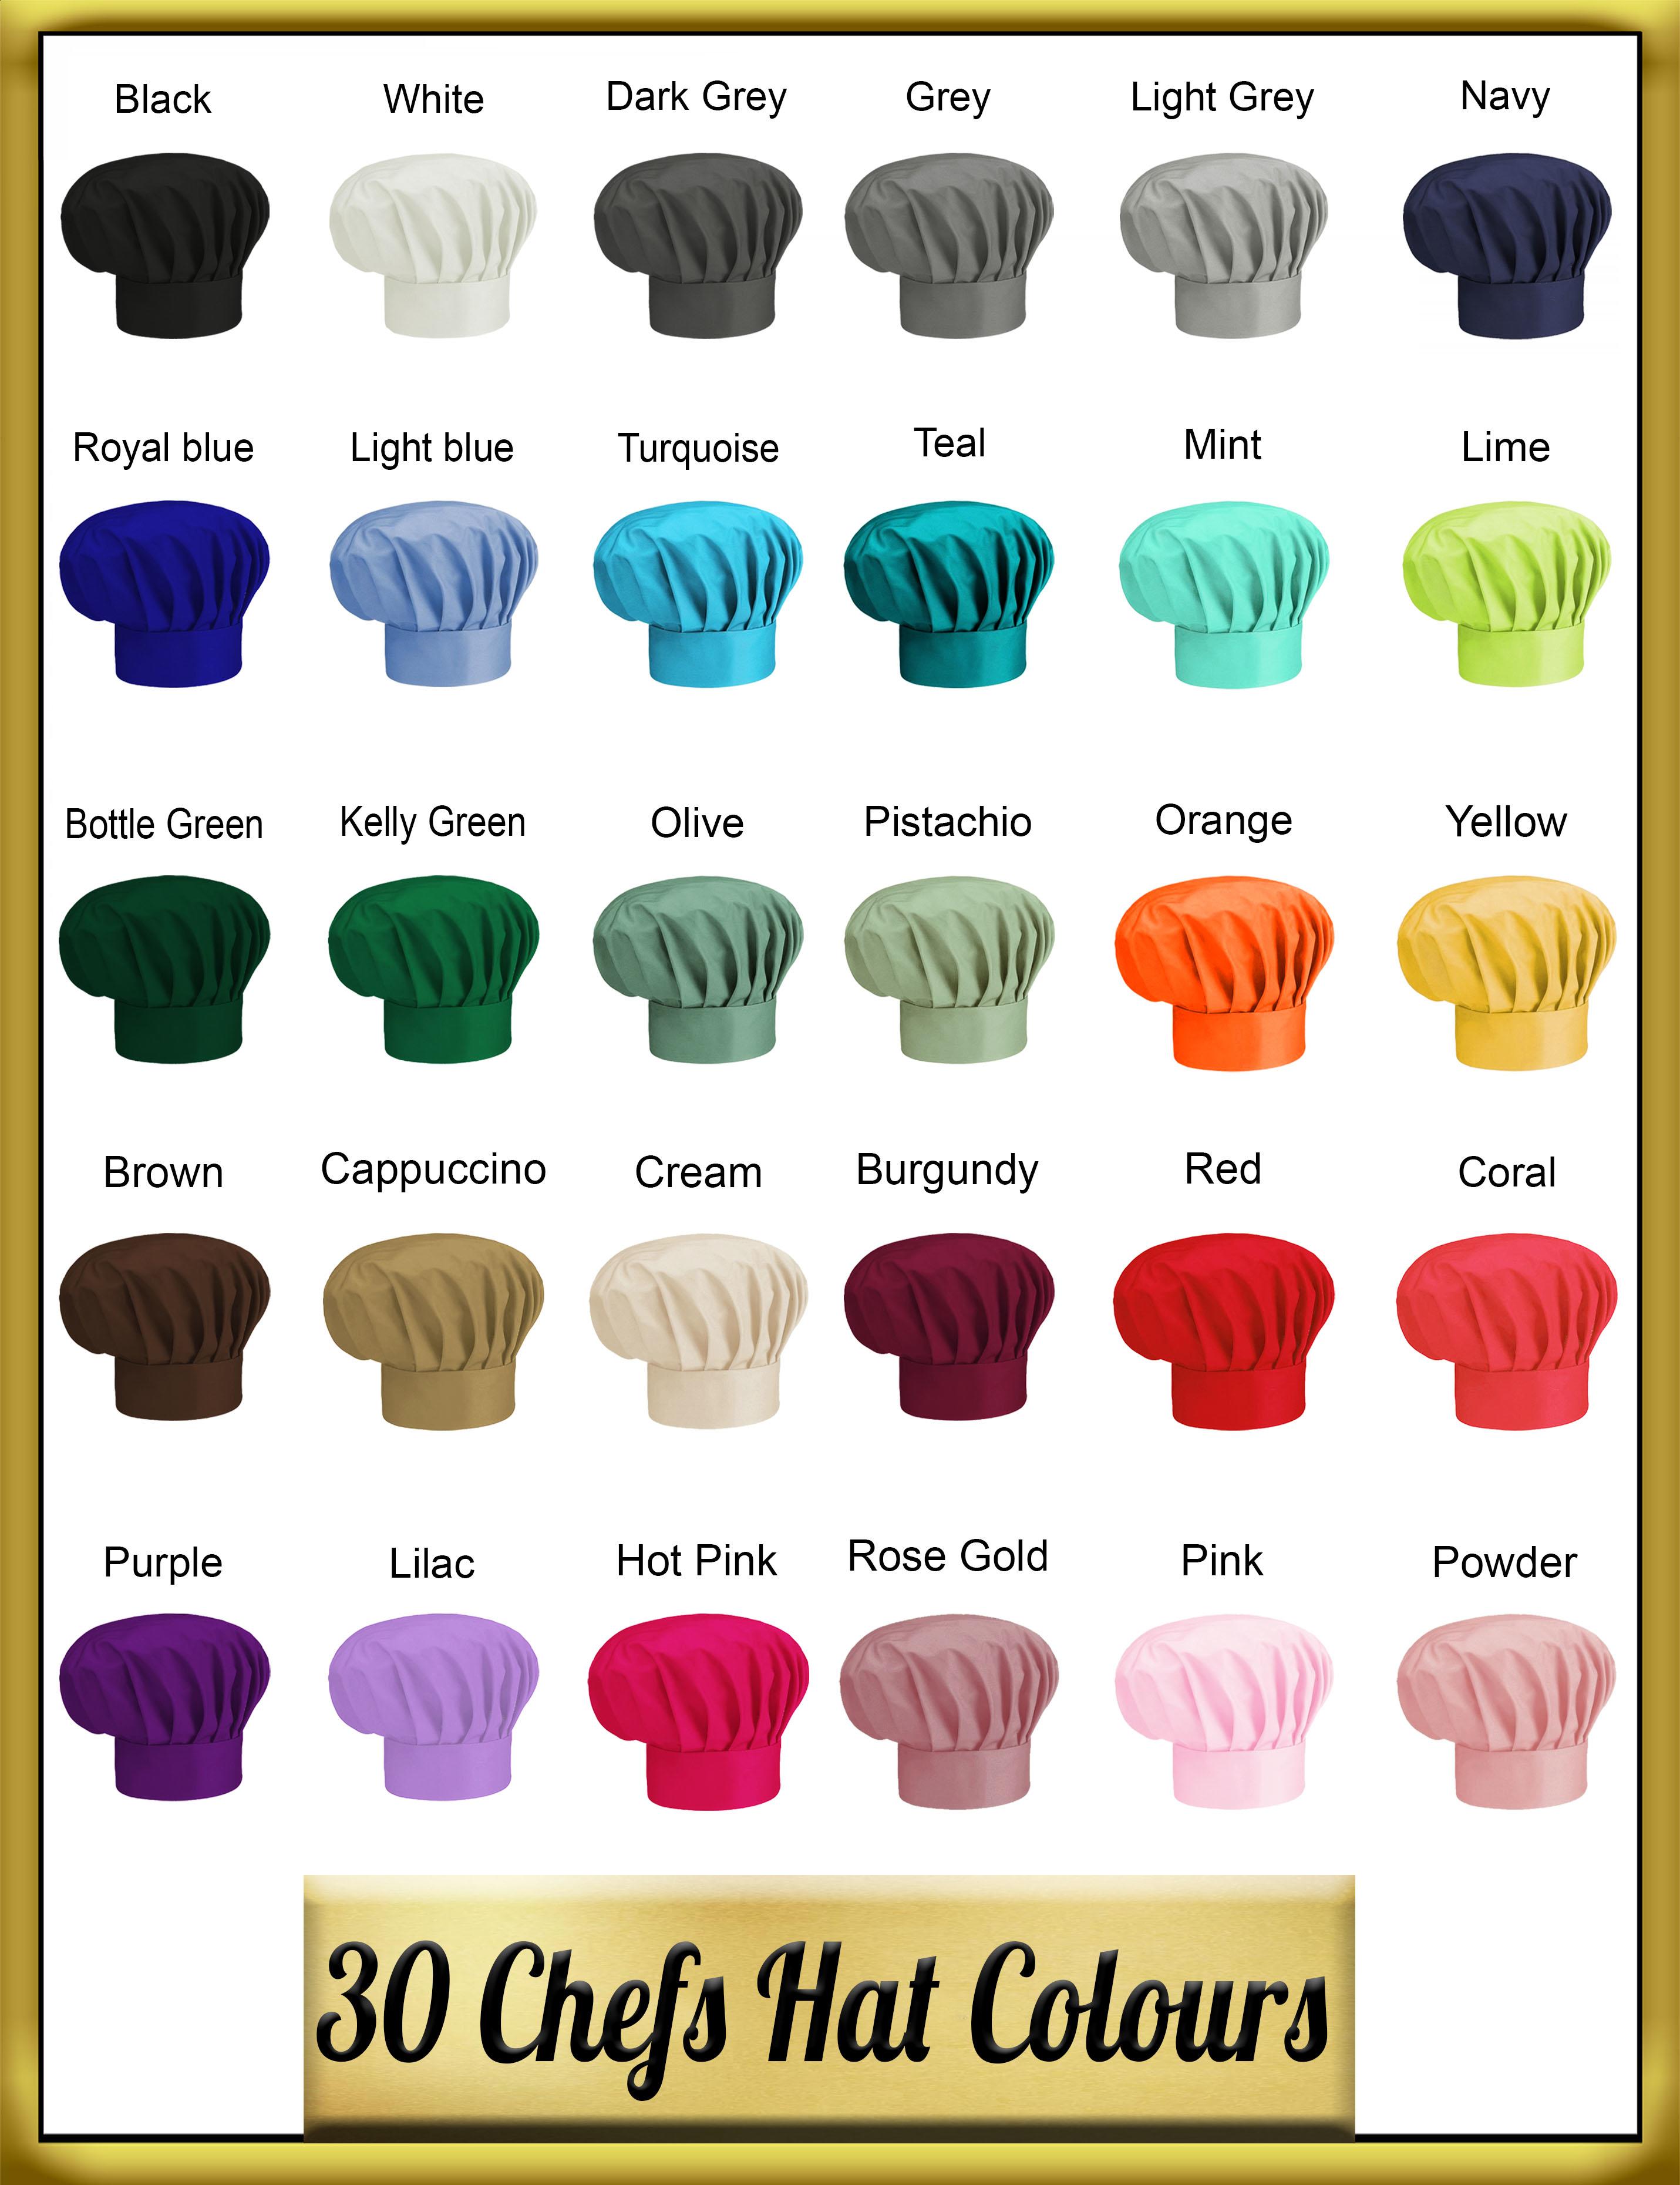 Head chef printed chef's hat colours